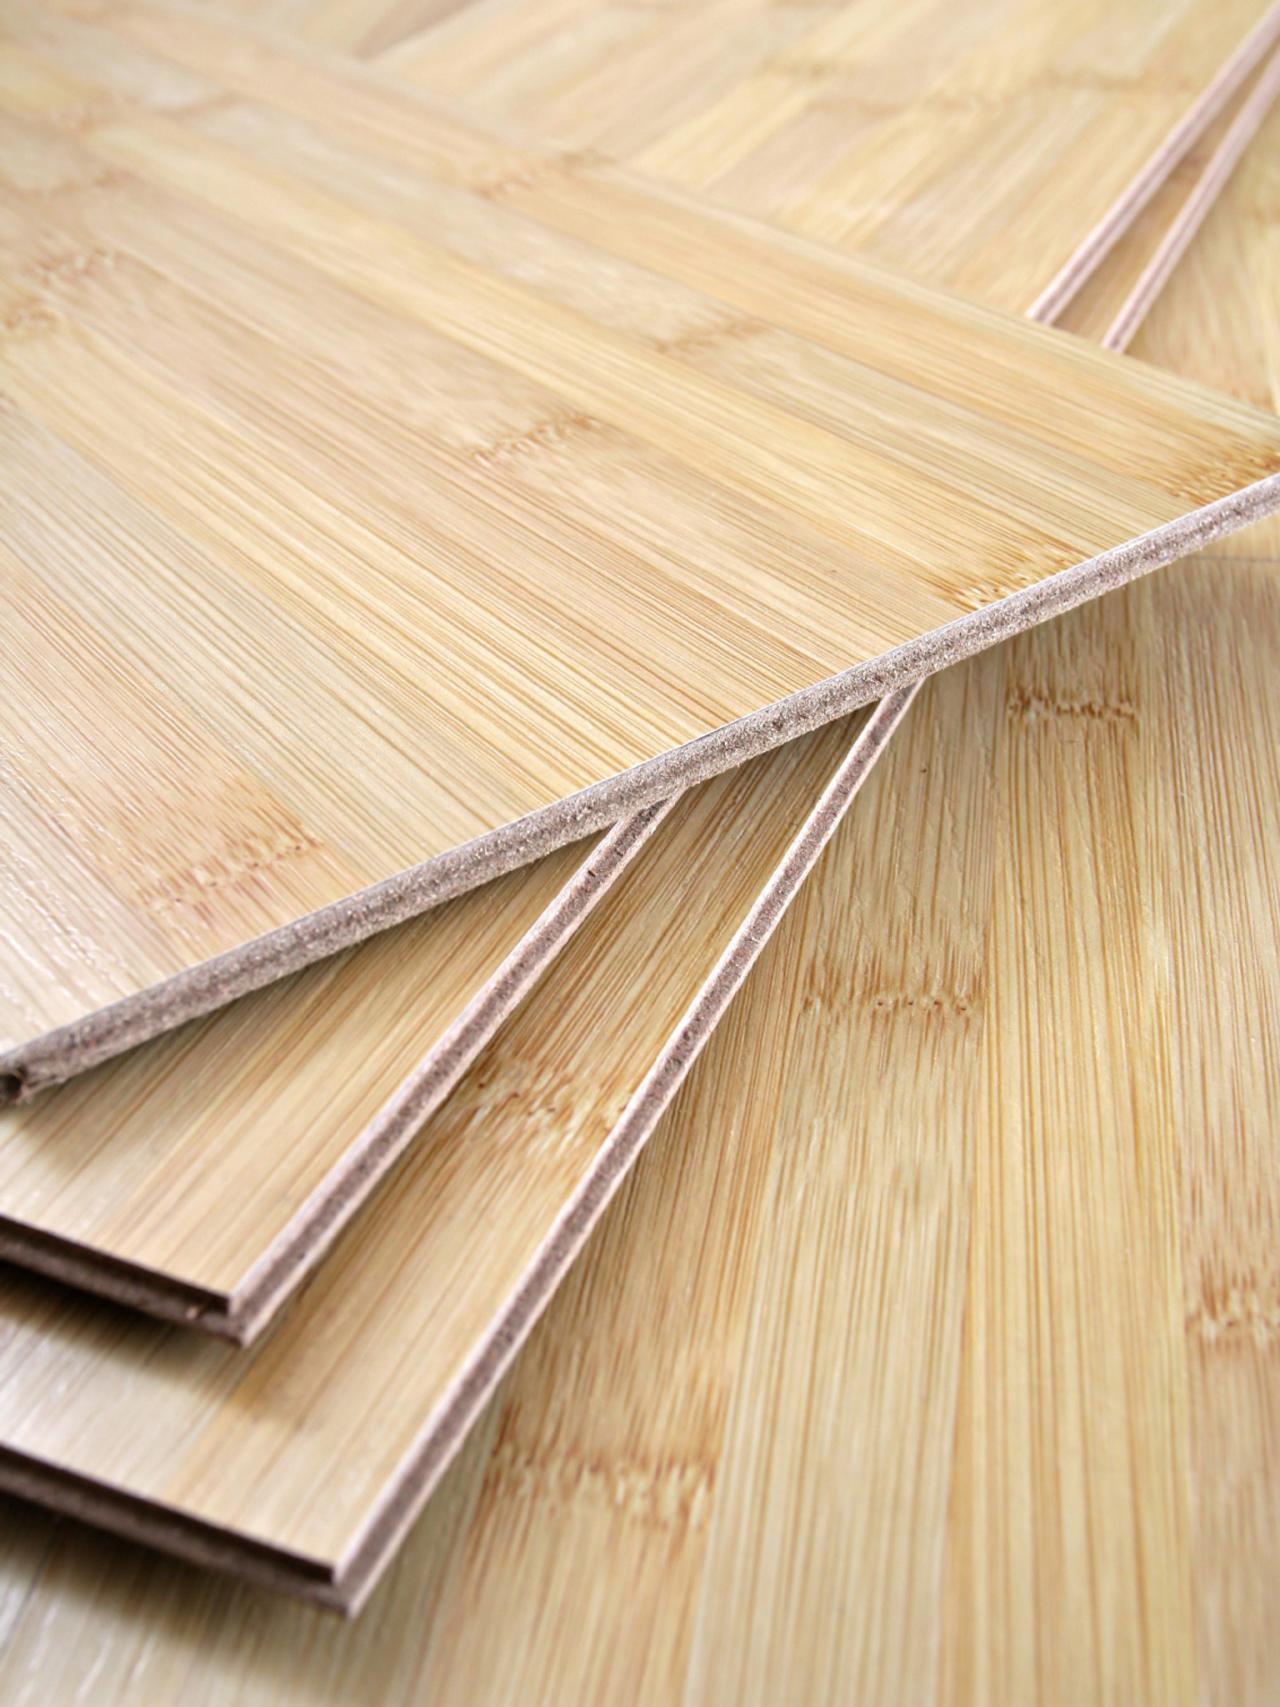 Cost Of Bamboo Floor Vs Engineered Hardwood, What Are The Disadvantages Of Bamboo Flooring